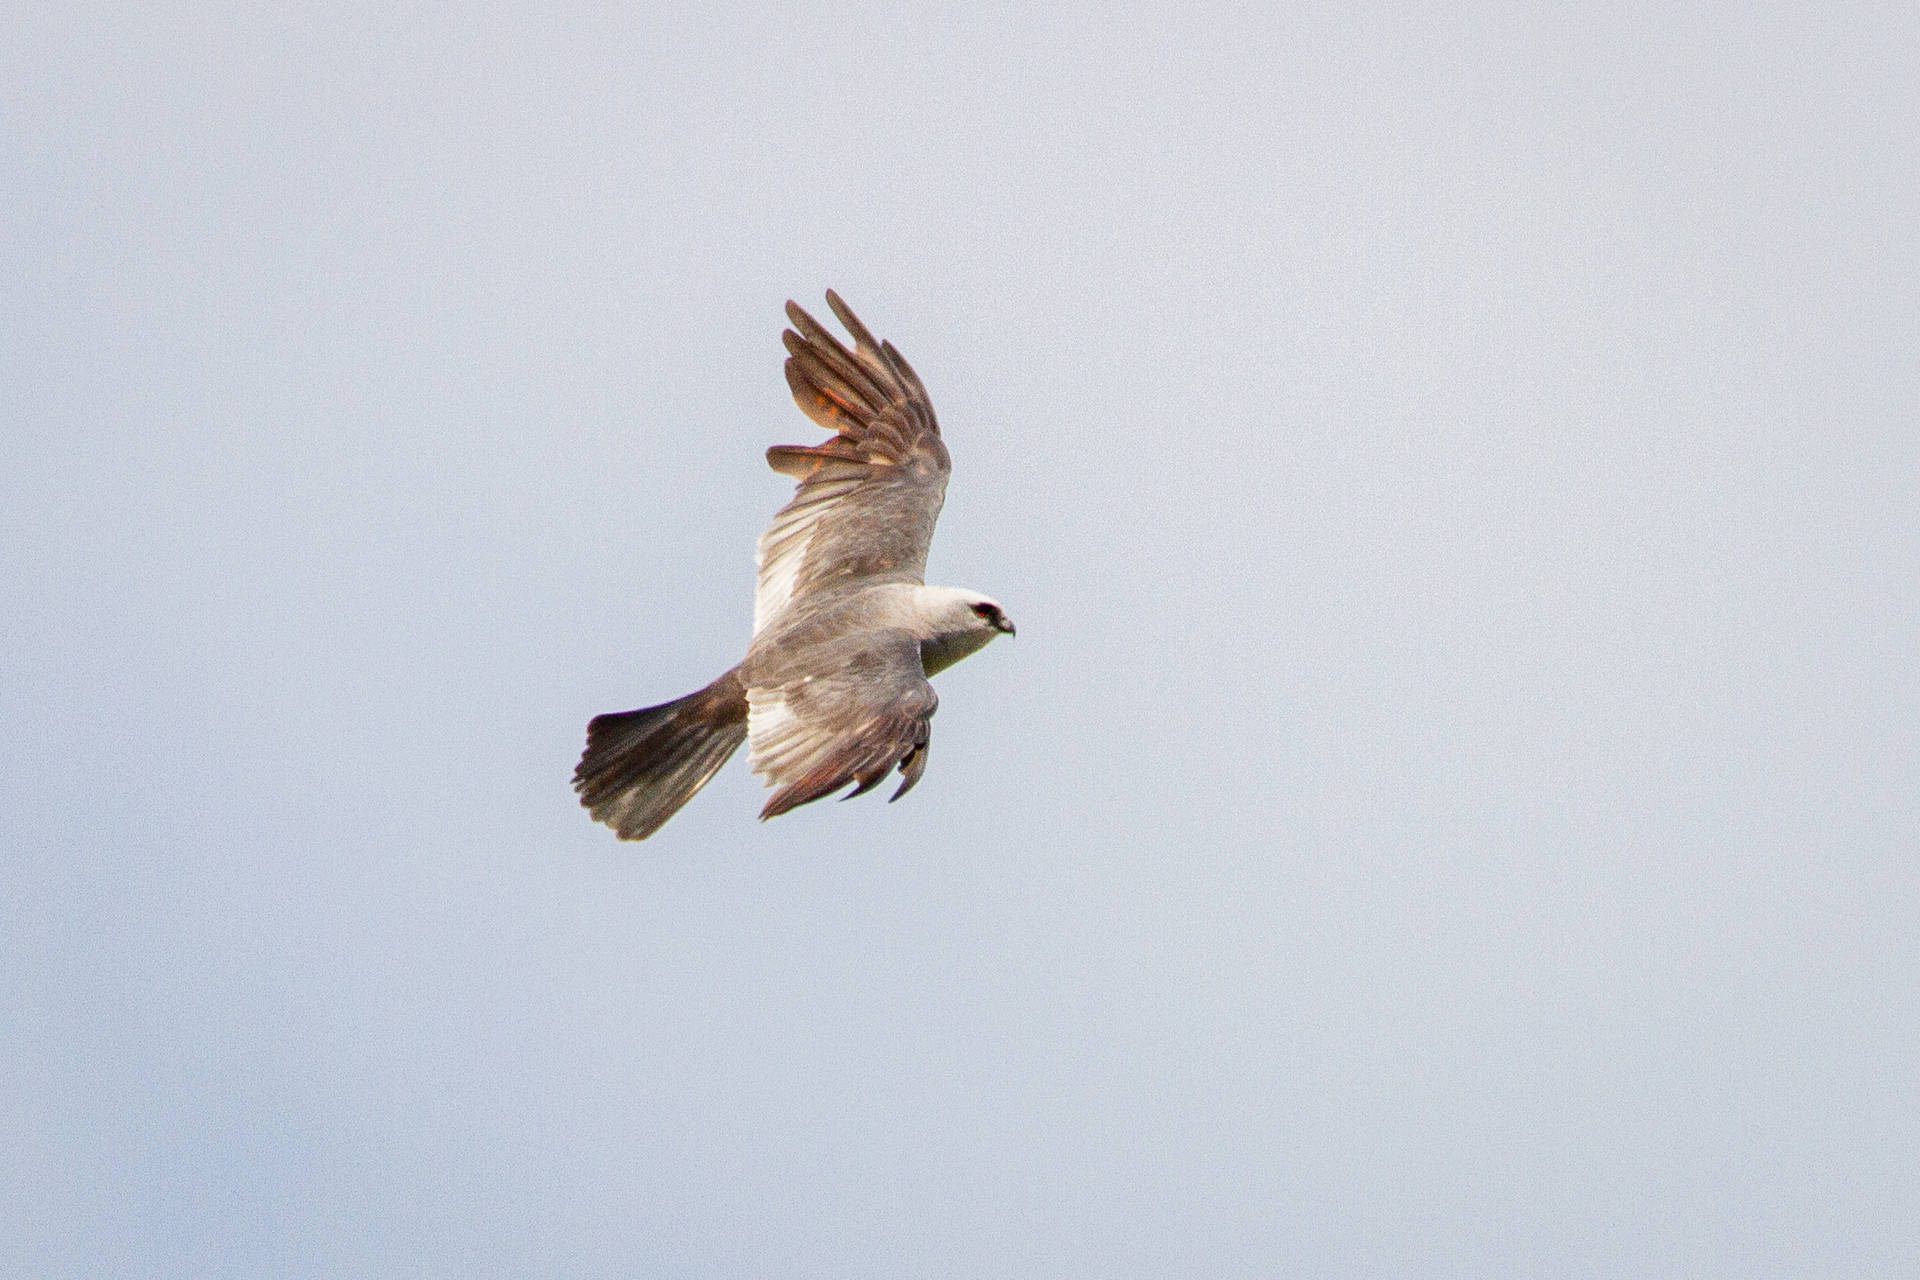 White Falcon Soaring In The Sky Background